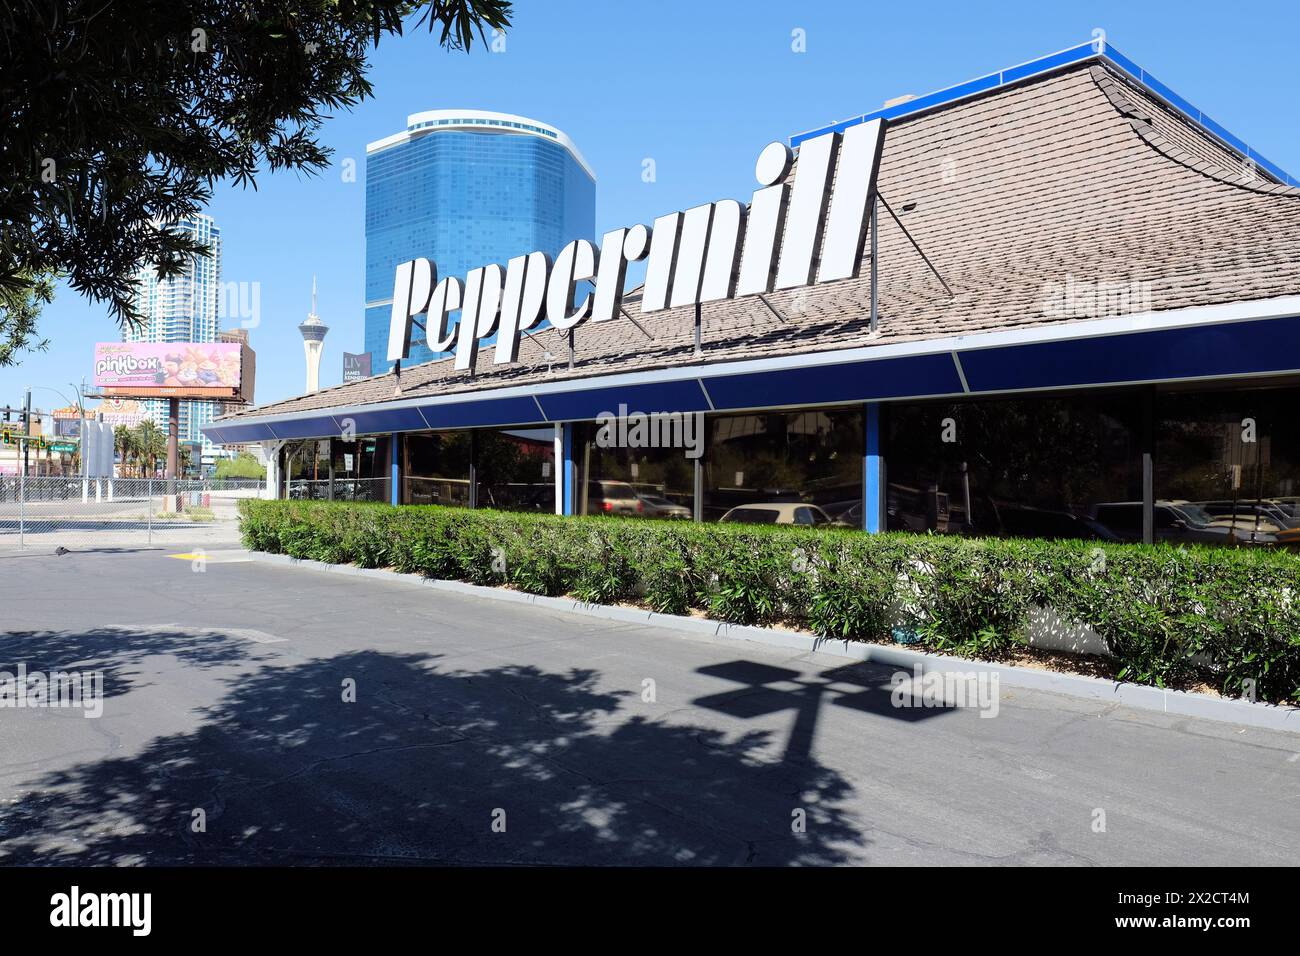 The Peppermill Restaurant and Fireside Lounge on Las Vegas Boulevard, an iconic restaurant and bar on the Las Vegas Strip, established in 1972. Stock Photo